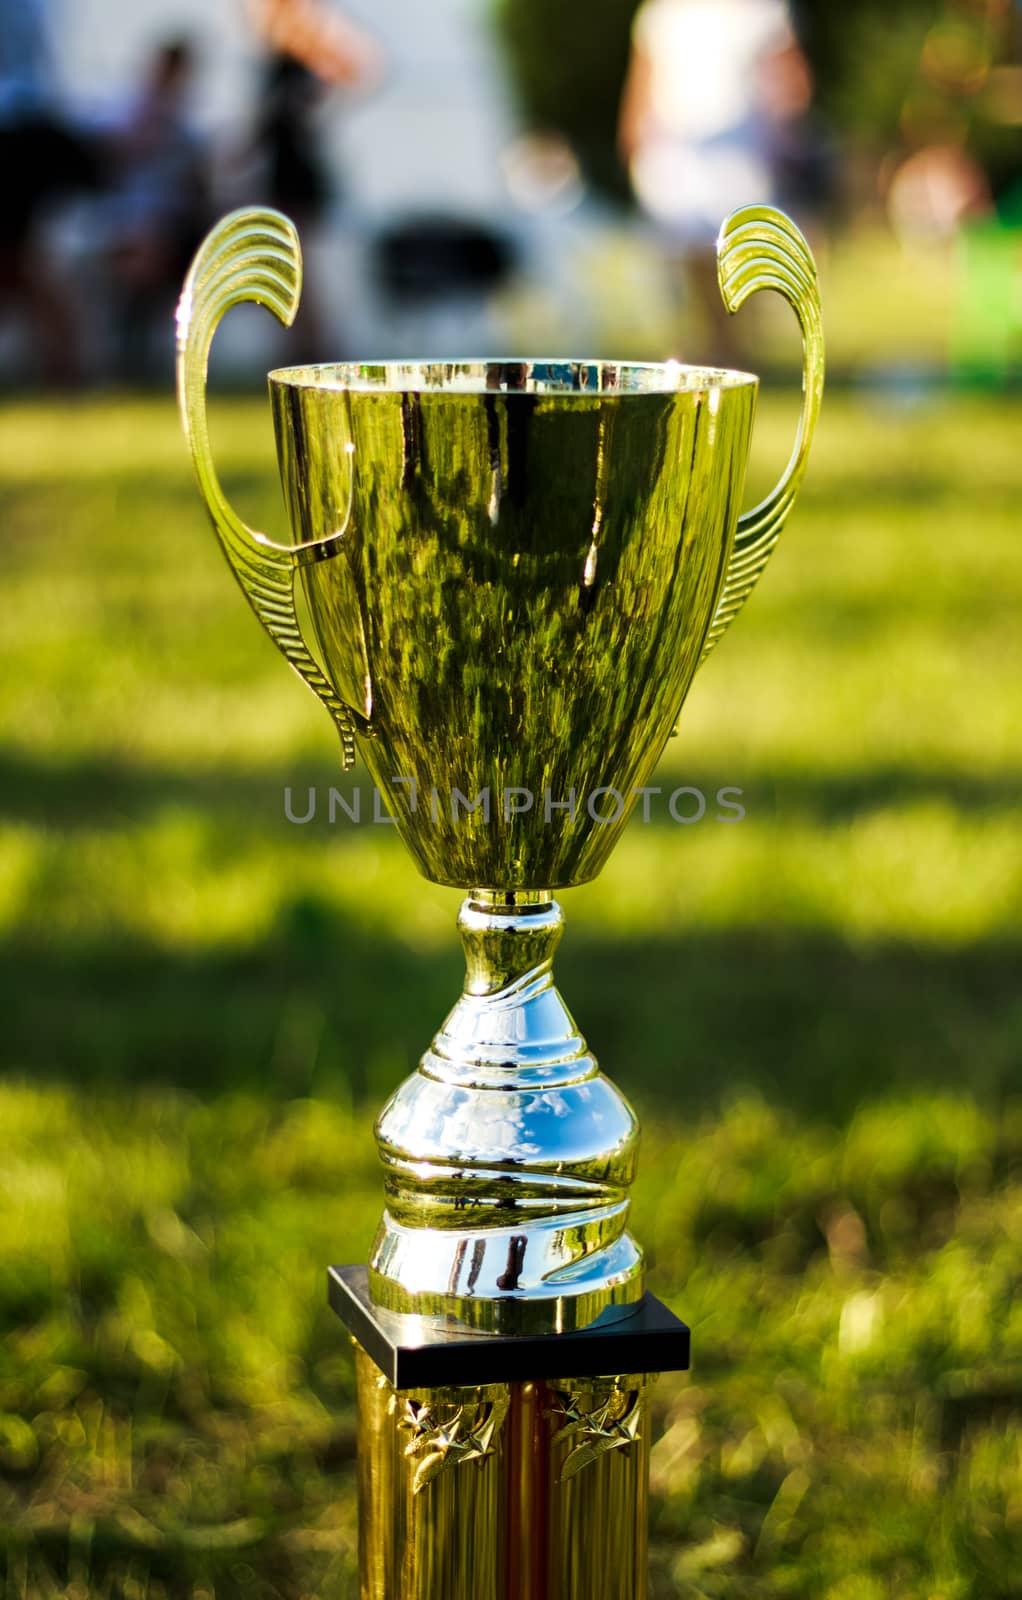 Champion's cup in power extreme games by DamantisZ